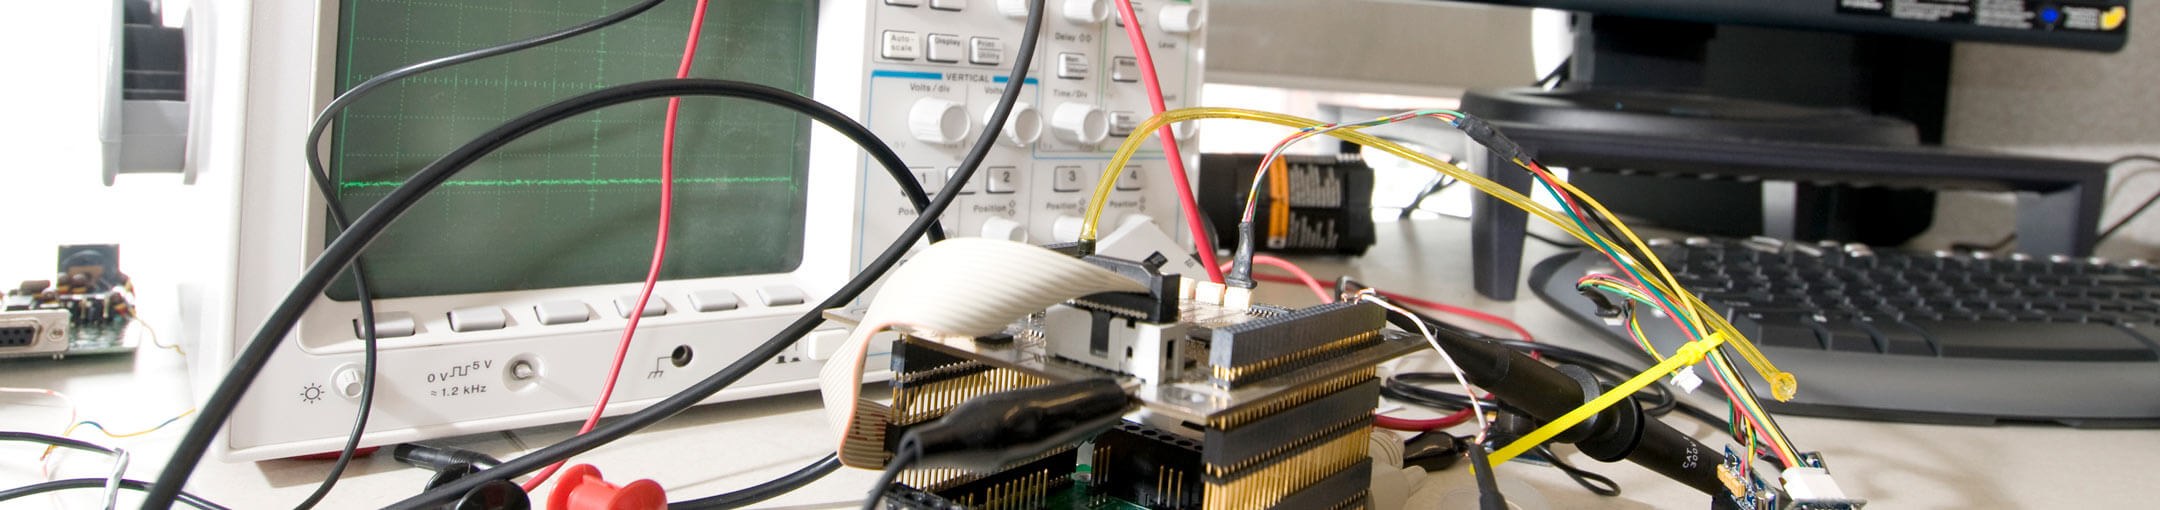 Circuit board, cords, and other electrical equipment with monitor and keyboard in background.